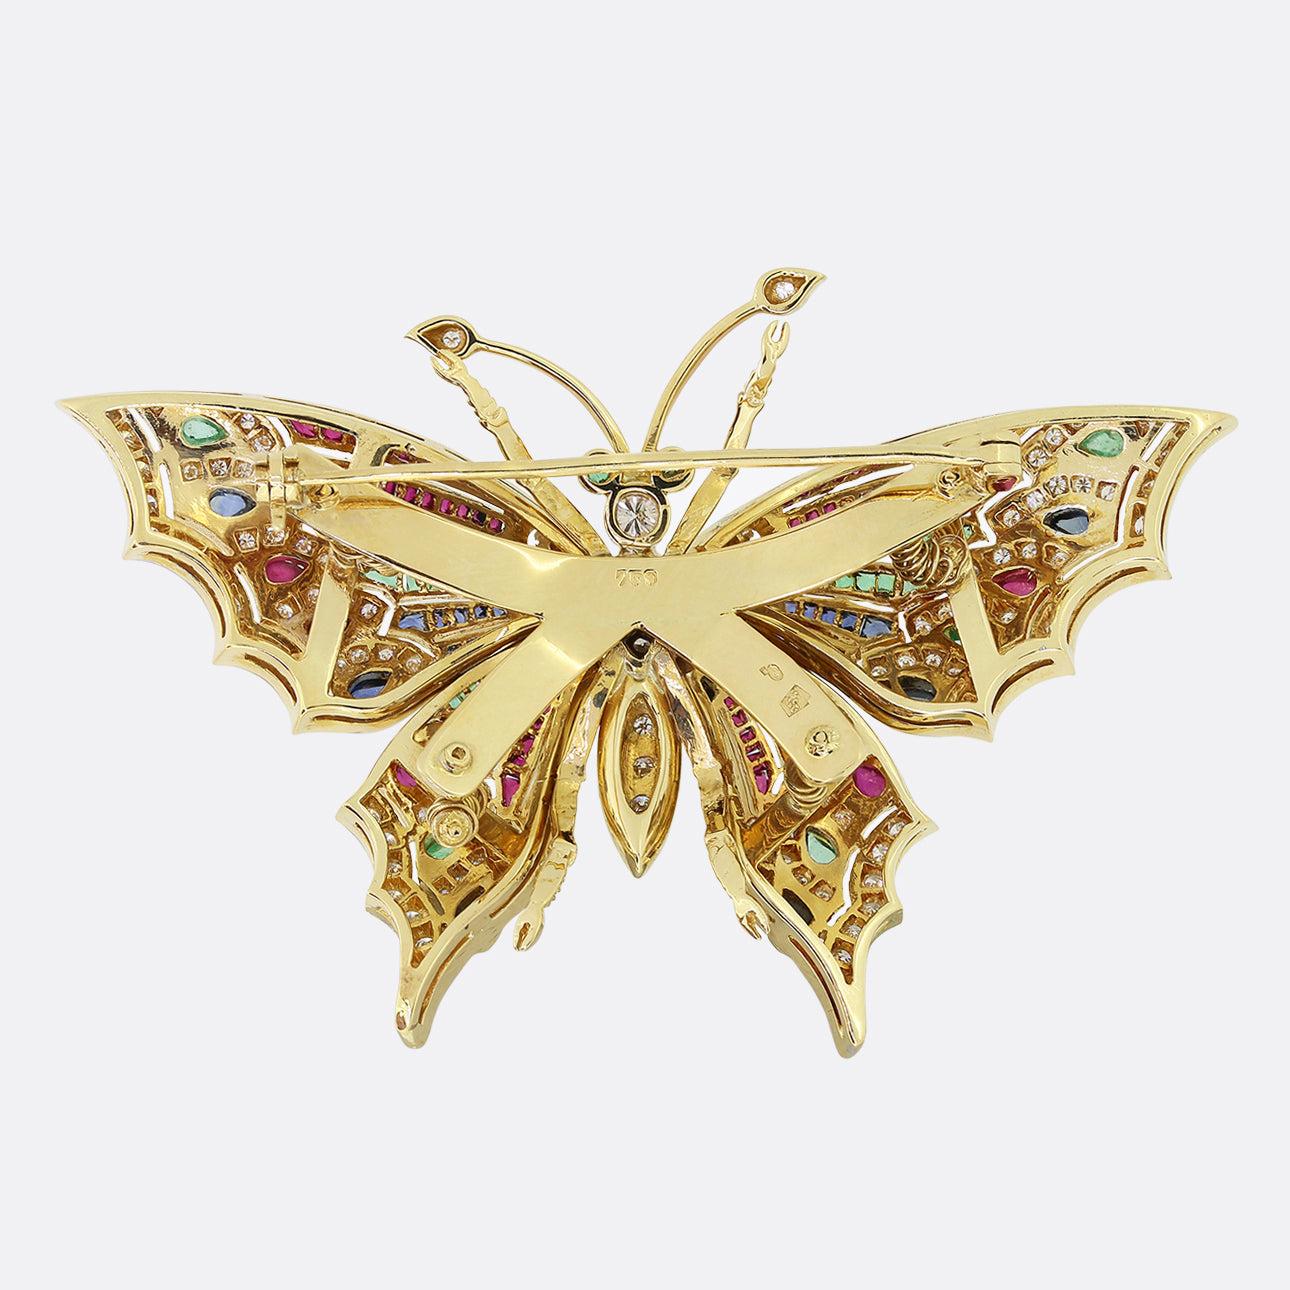 Here we have a vibrant gem set brooch from the 1970s. This vintage piece has been crafted from 18ct yellow gold into the shape of a butterfly with distinct channels milgrain set with a vast array of colourful gemstones of different shapes and sizes